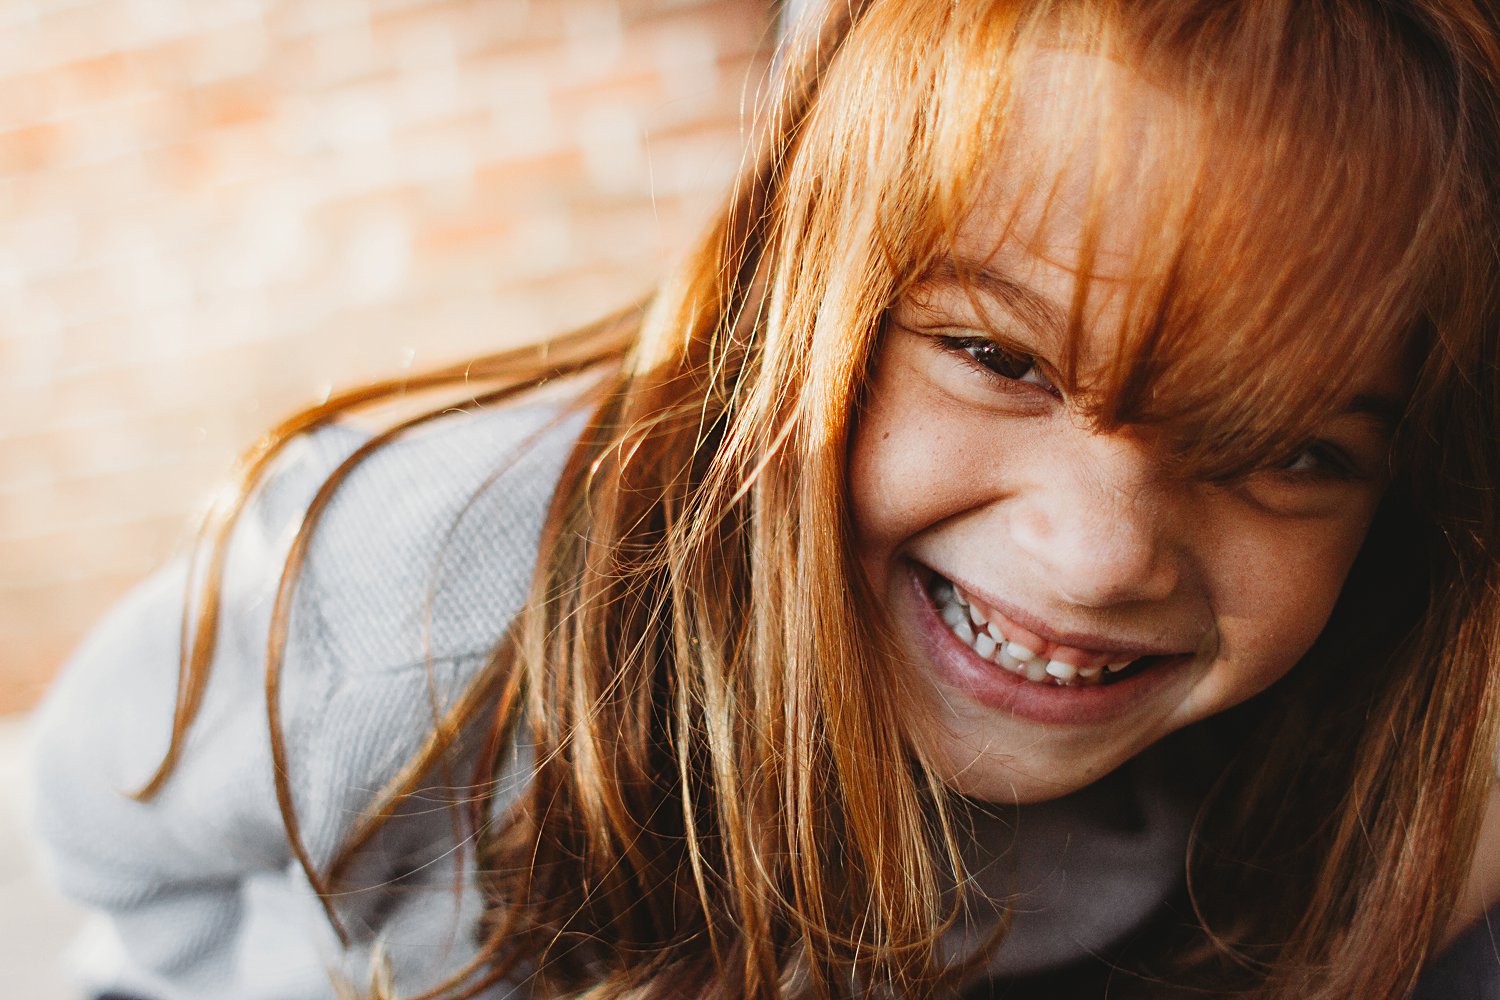 Portrait of young girl laughing